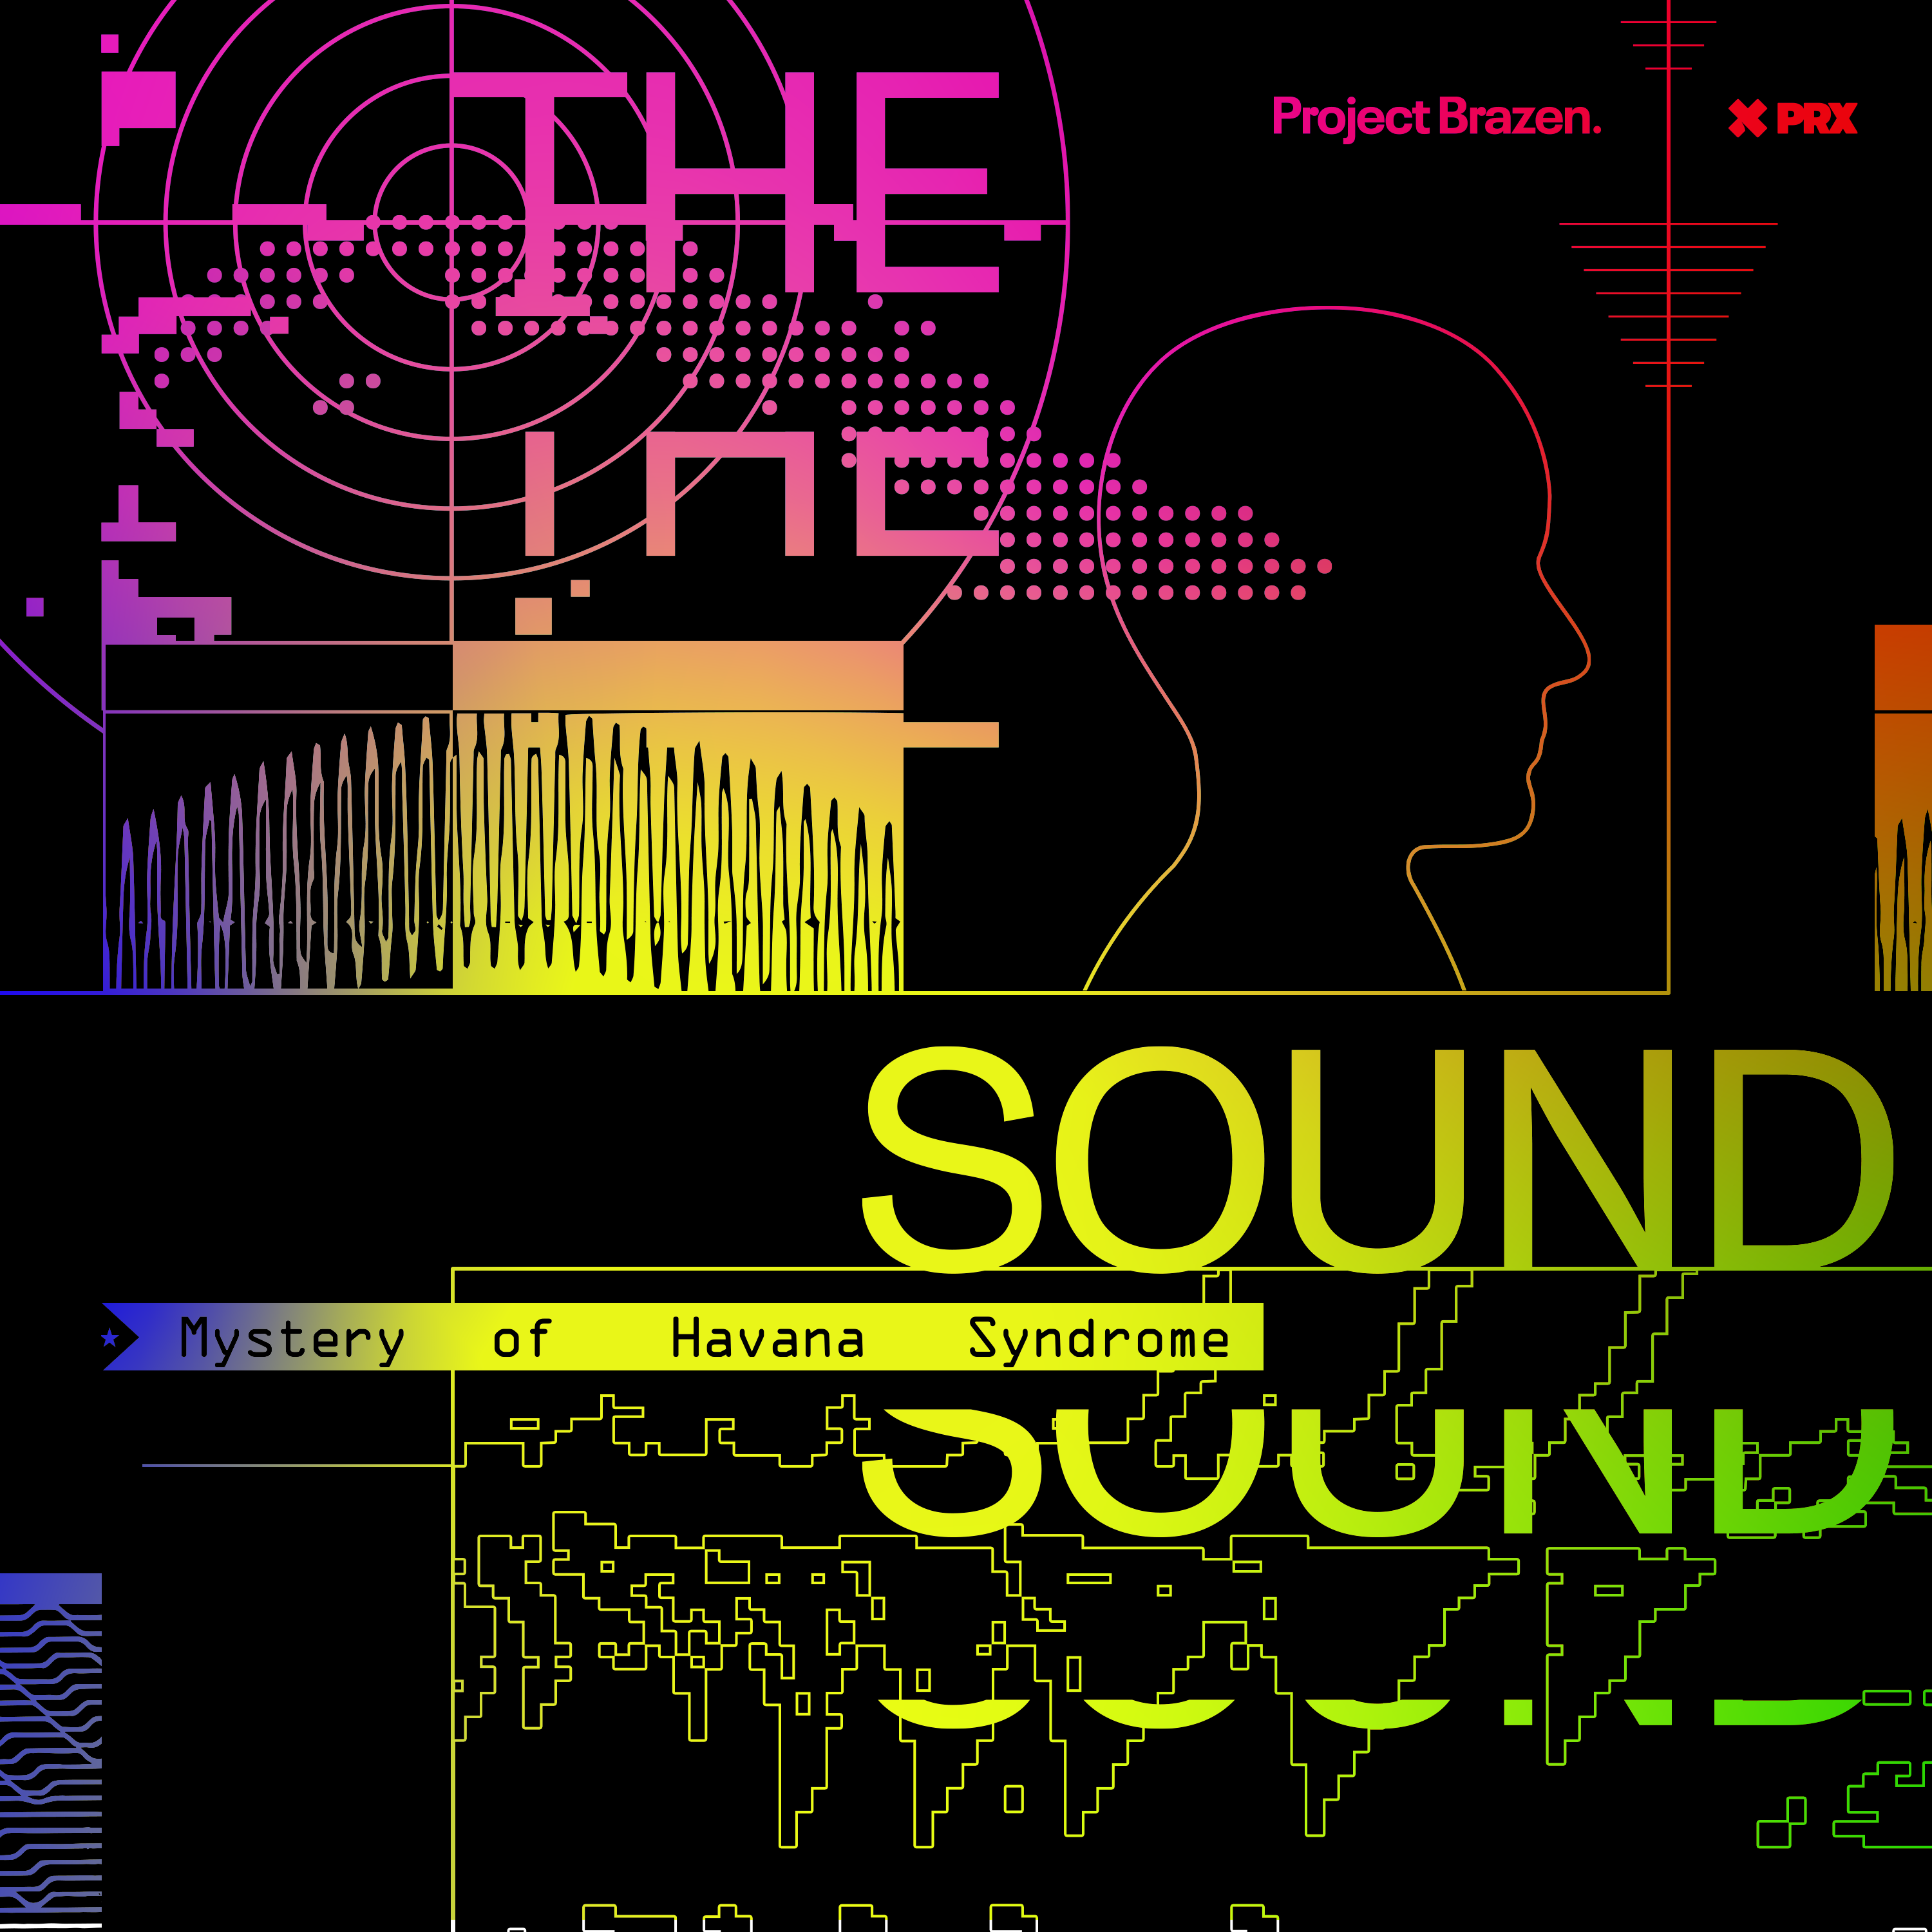 Introducing The Sound: Mystery of Havana Syndrome